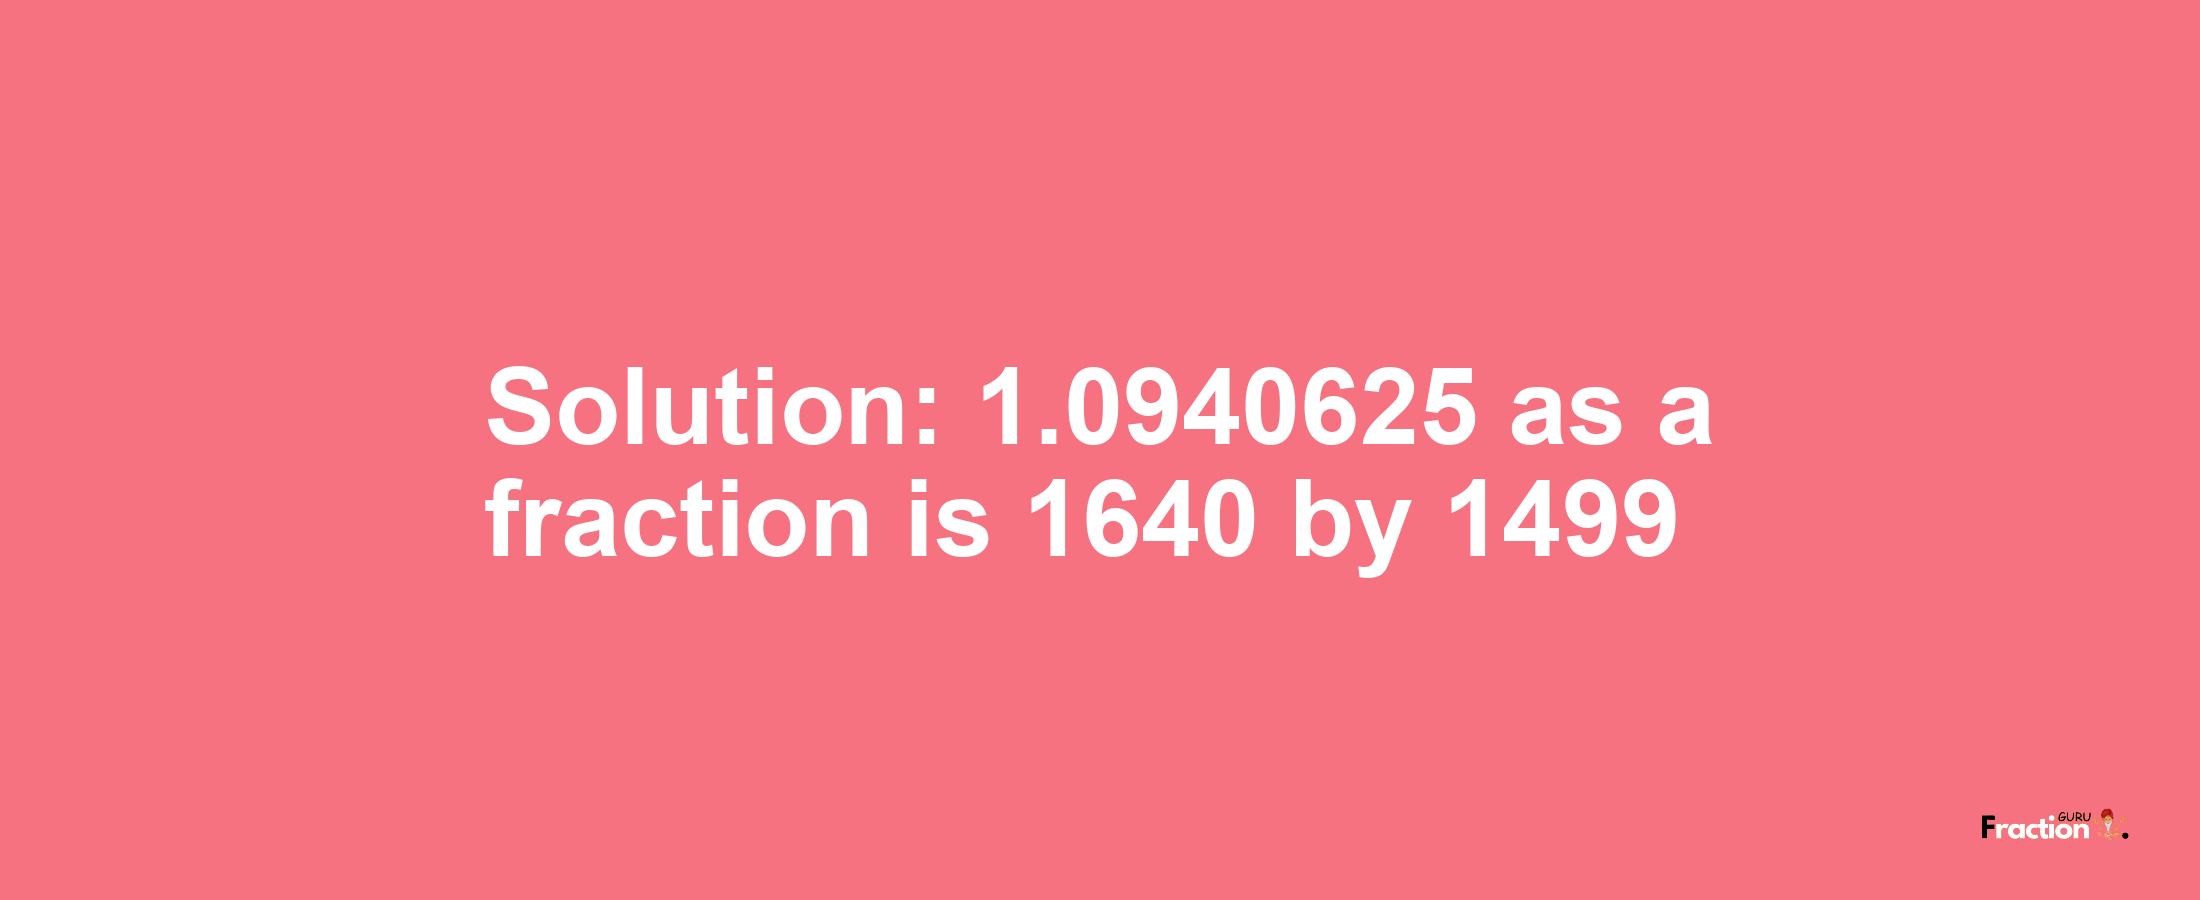 Solution:1.0940625 as a fraction is 1640/1499